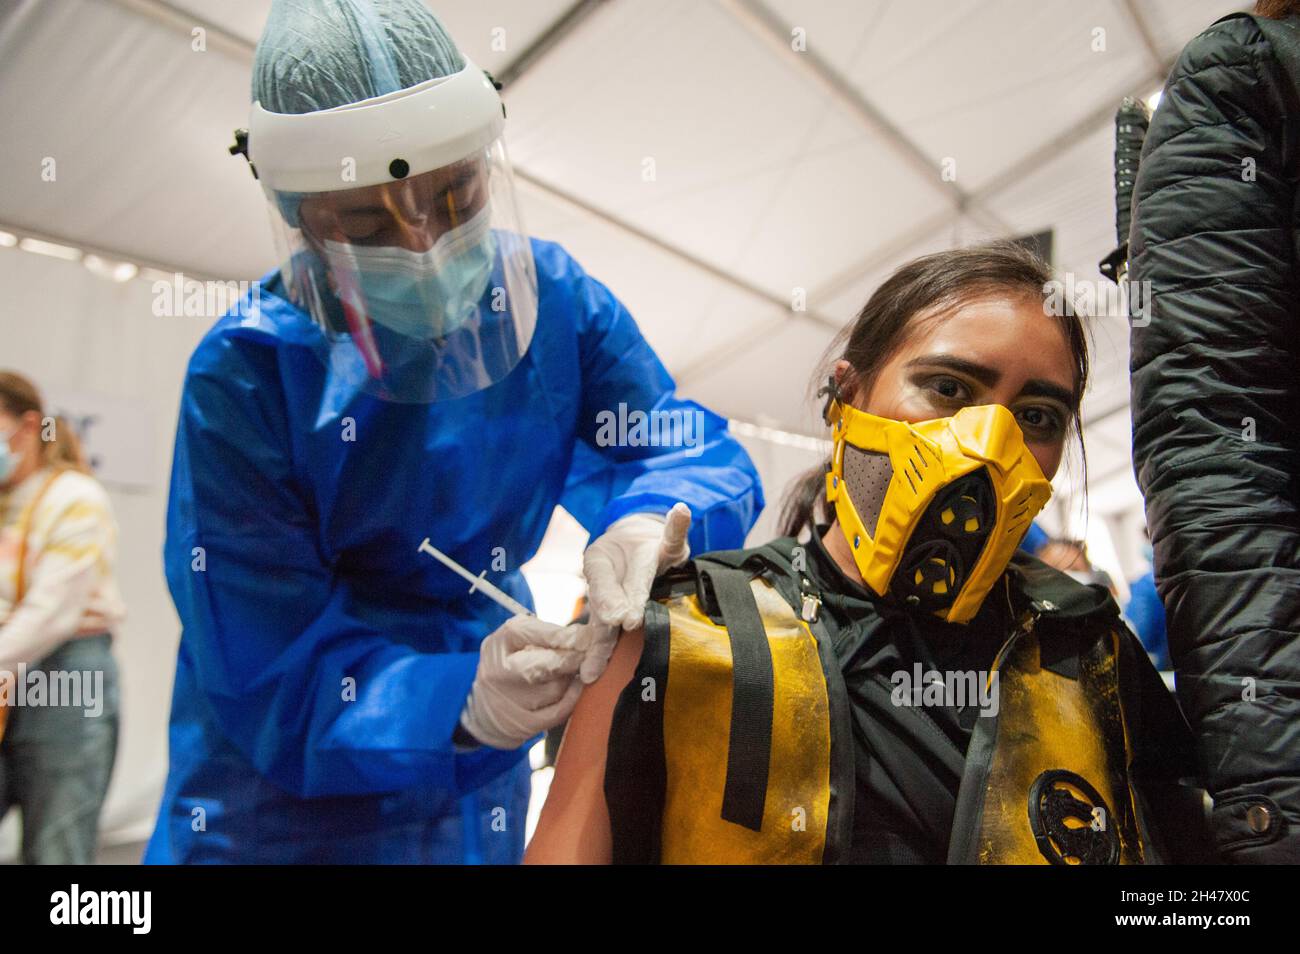 A girl dressed as Mortal Combat's character Scorpion as she gets her first dose of the COVID-19 vaccine as the Colombian government begins to vaccinat Stock Photo